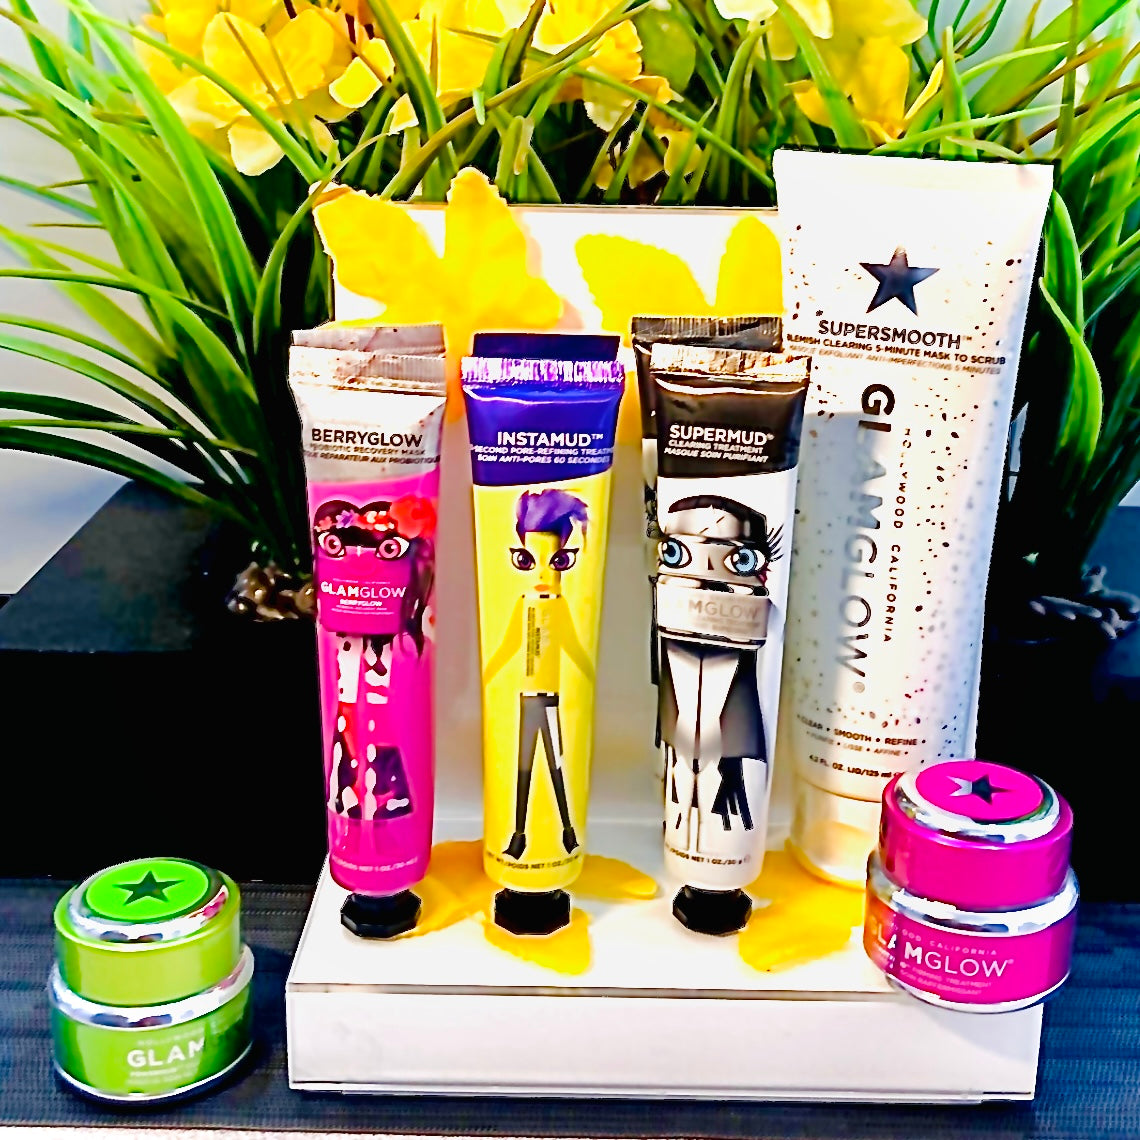 Glam Glow Jet Set Ultimate Skin care bundle and Grand Glow Bundle. Each bundle include 6-7 full size products currently valued over $100 and is being sold here for 80% off while supplies last. we are also offering discounts and free shipping as part if our promotional relaunch celebration. both bundles are only available at Facetreasures ans curated by Facetreasures Only. you will not find either bundle anywhere else guaranteed! you may only purchase at Facetreasures.com